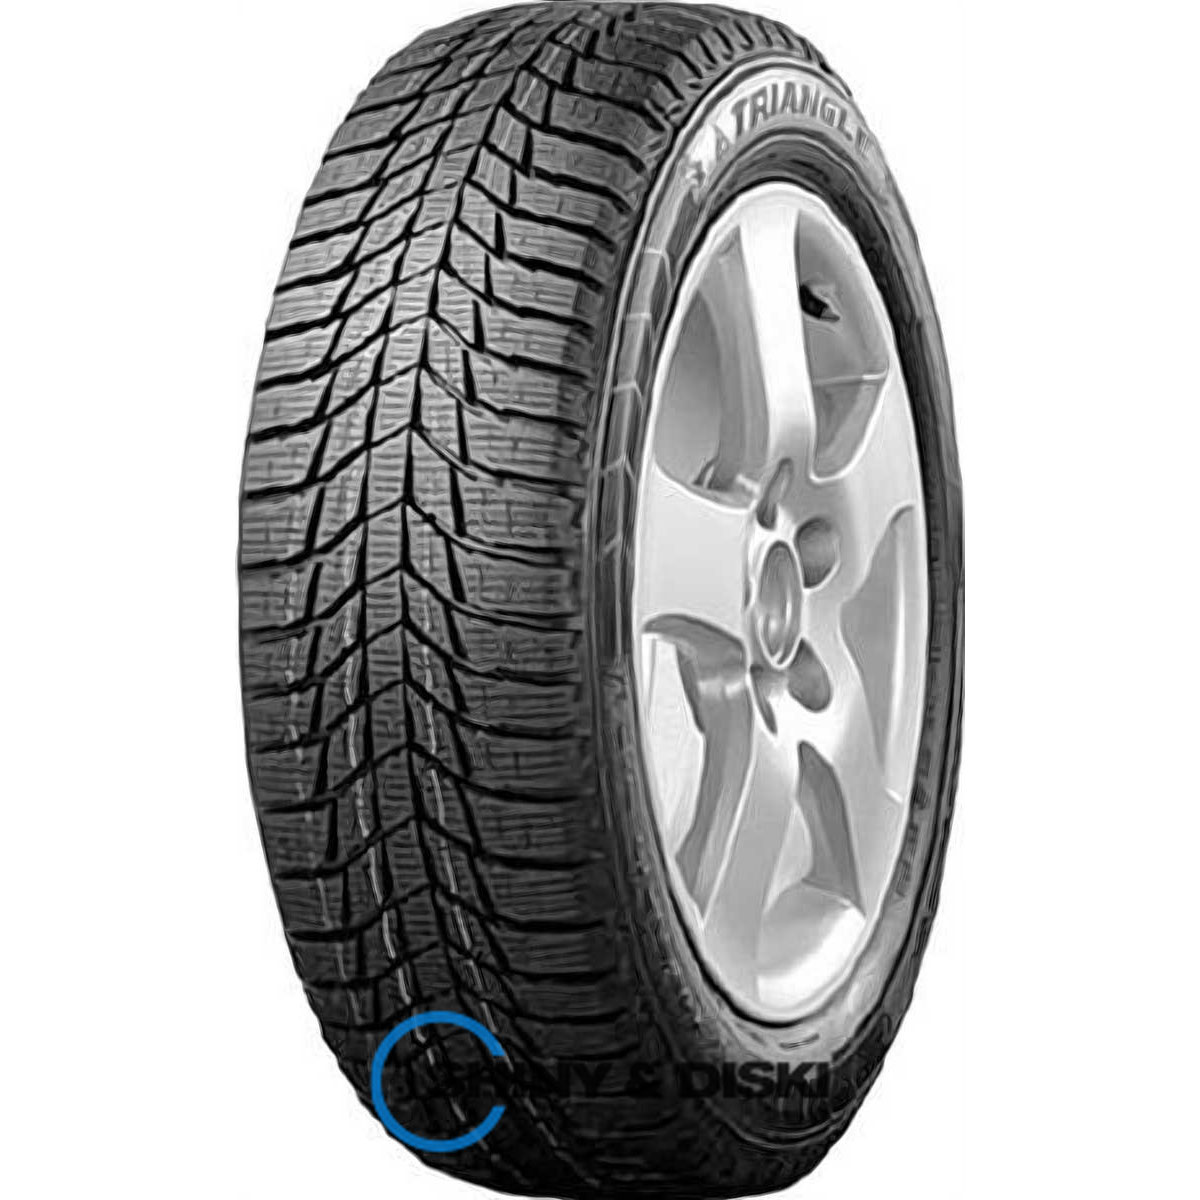 покрышки triangle pl01 225/65 r17 106r